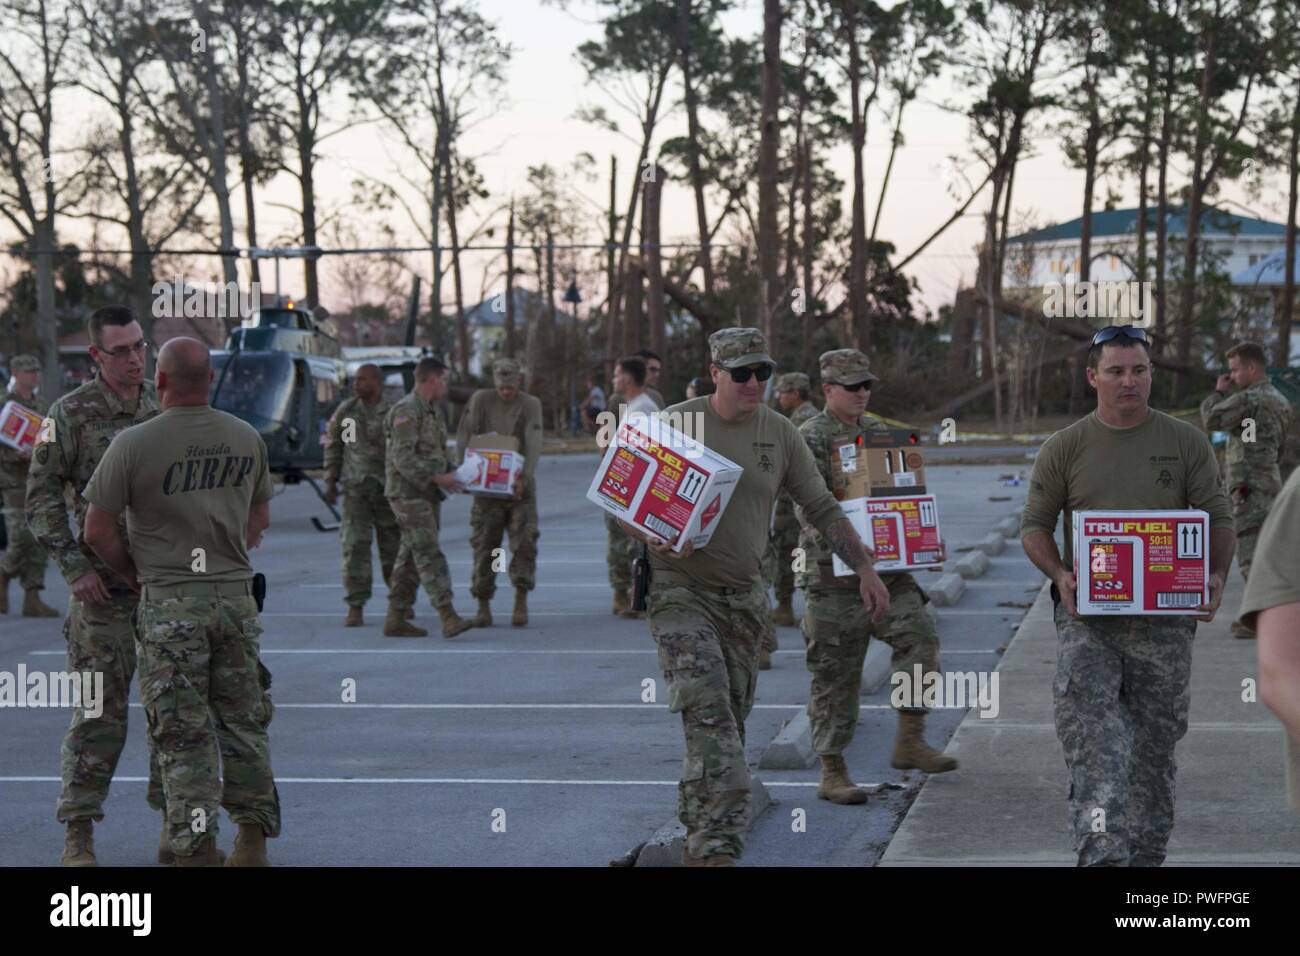 Members of the Florida National Guard's CERF-P (Chemical, Biological, Radiological, Nuclear and high-yield Explosive (CBRNE) Enhanced Response Force Package) unit offload supplies that need to be replenished as they continue their hurricane relief efforts in Florida's panhandle, Oct. 13, 2018, October 14, 2018. Hurricane Michael decimated the panhandle as it made landfall, which left hundreds of thousands people without power, food or water. () Stock Photo